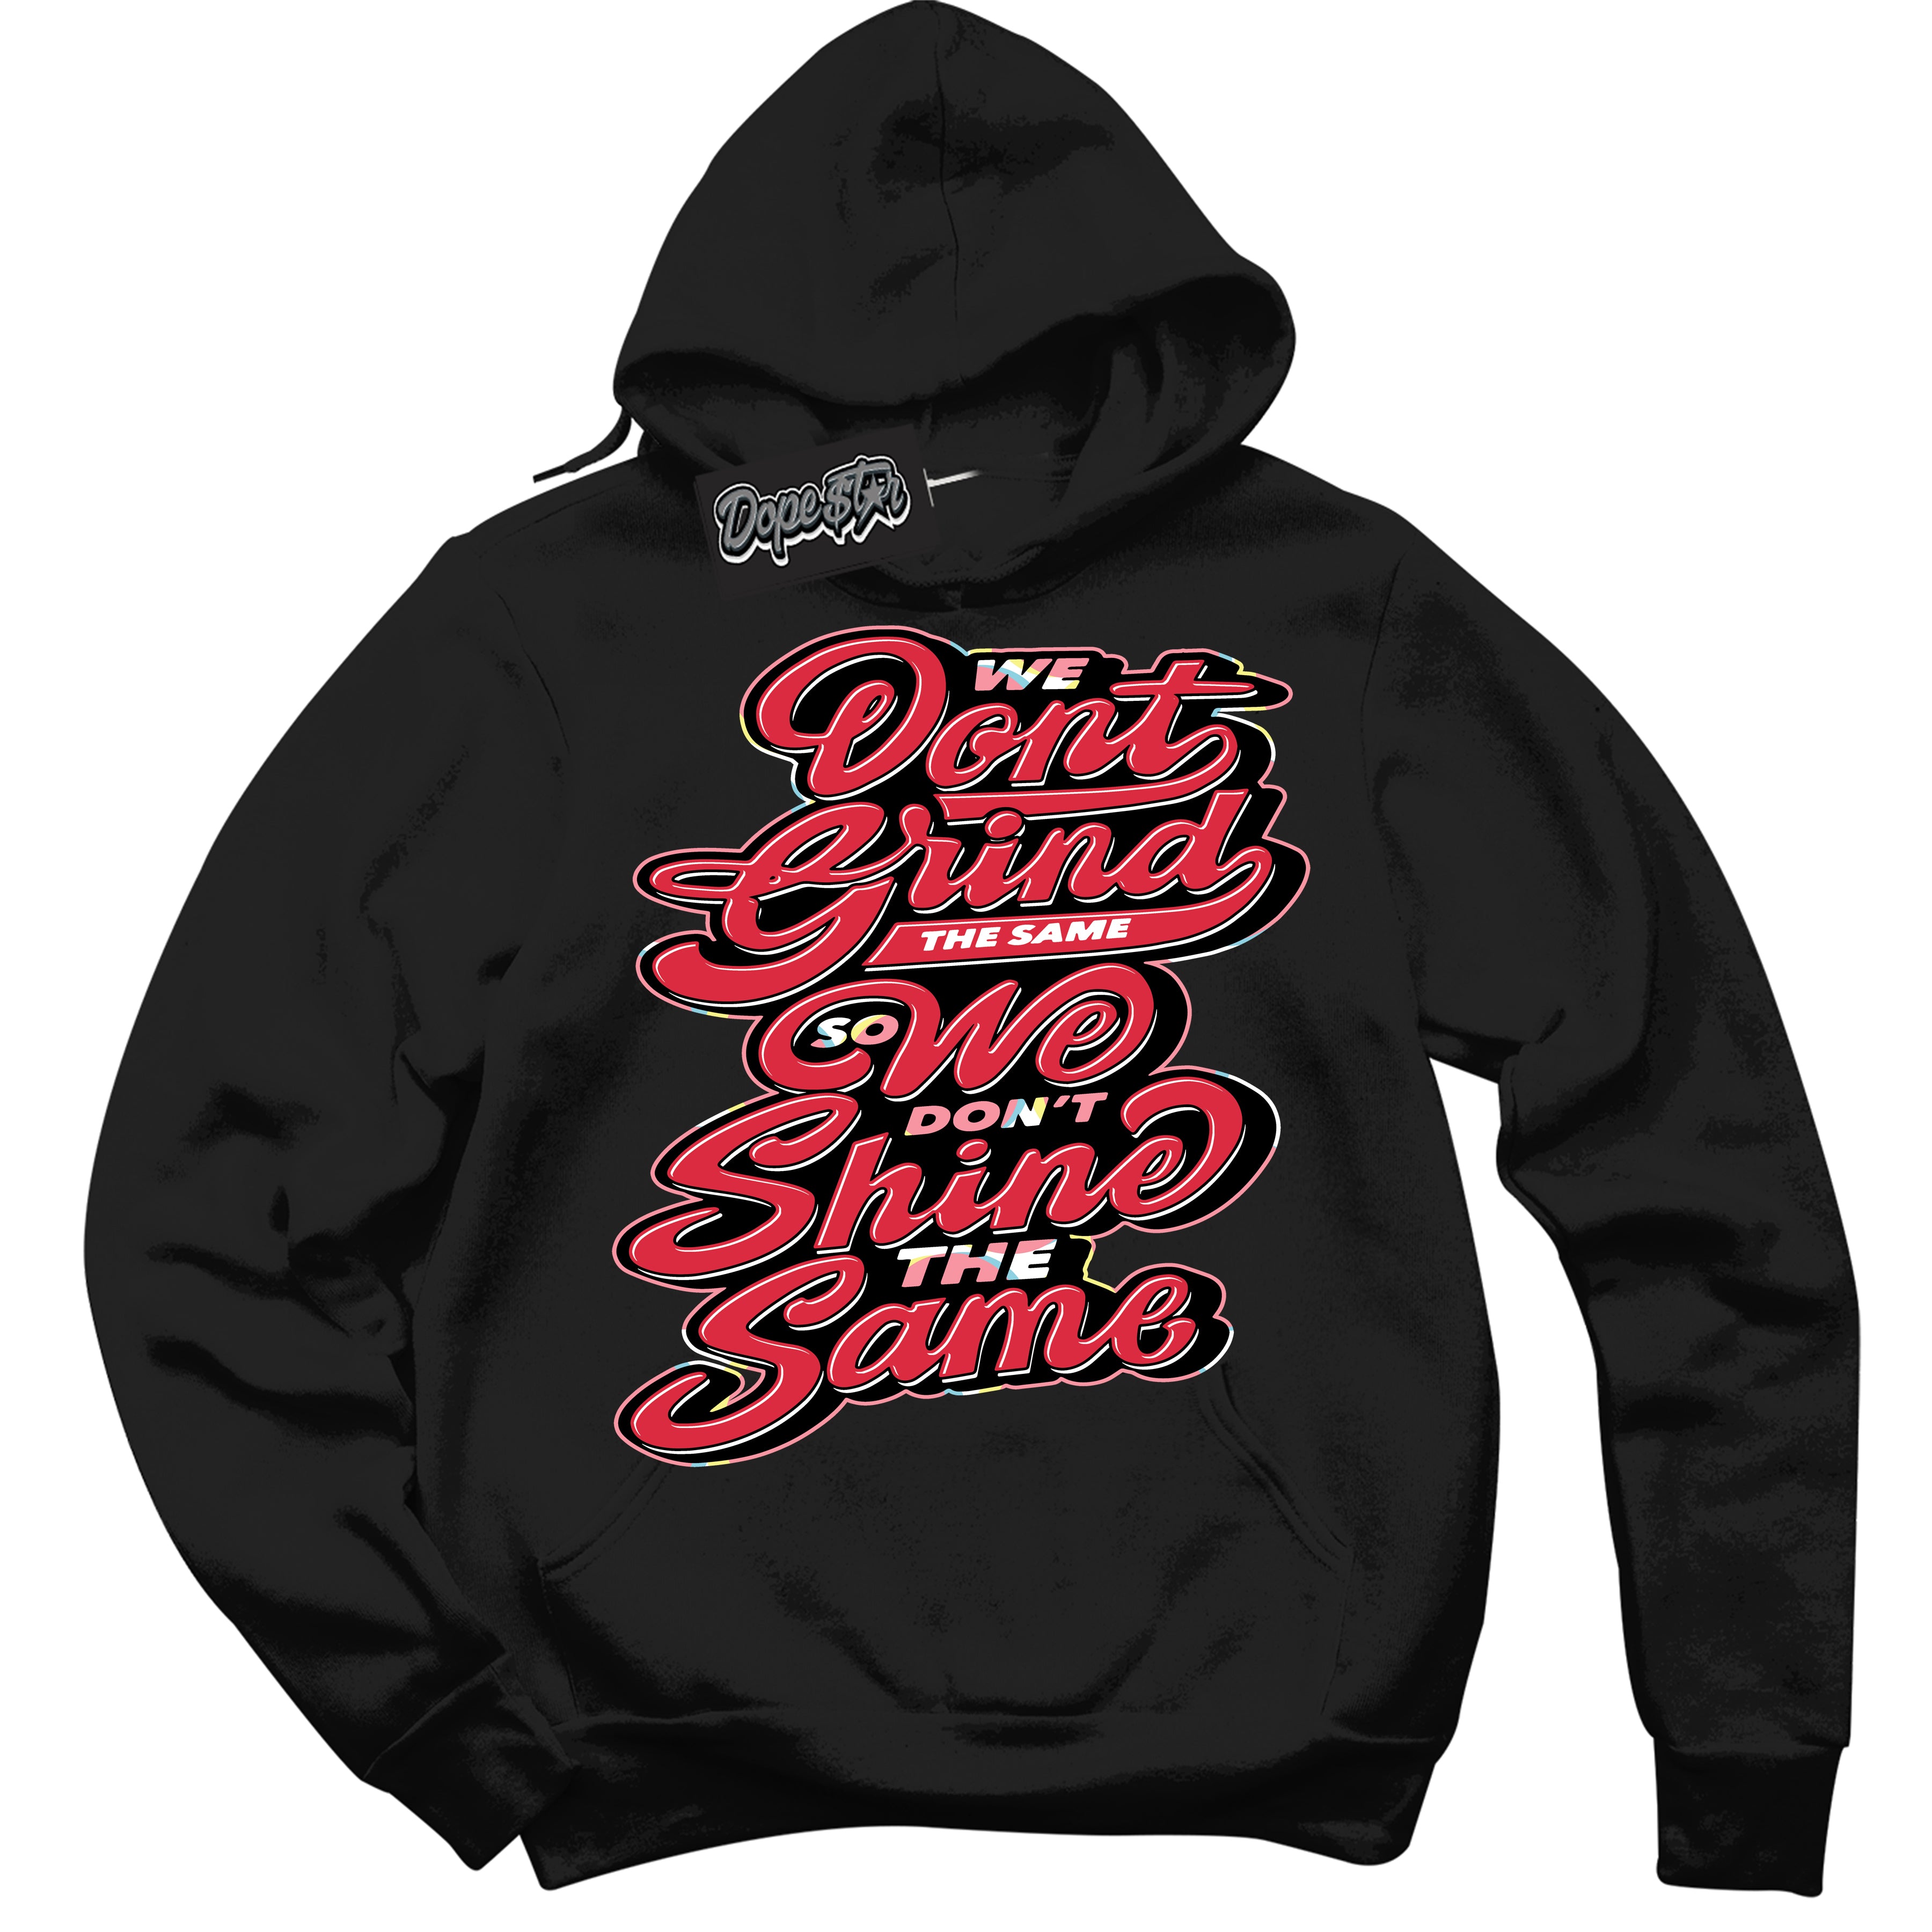 Cool Black Graphic DopeStar Hoodie with “ Grind Shine “ print, that perfectly matches Spider-Verse 1s sneakers